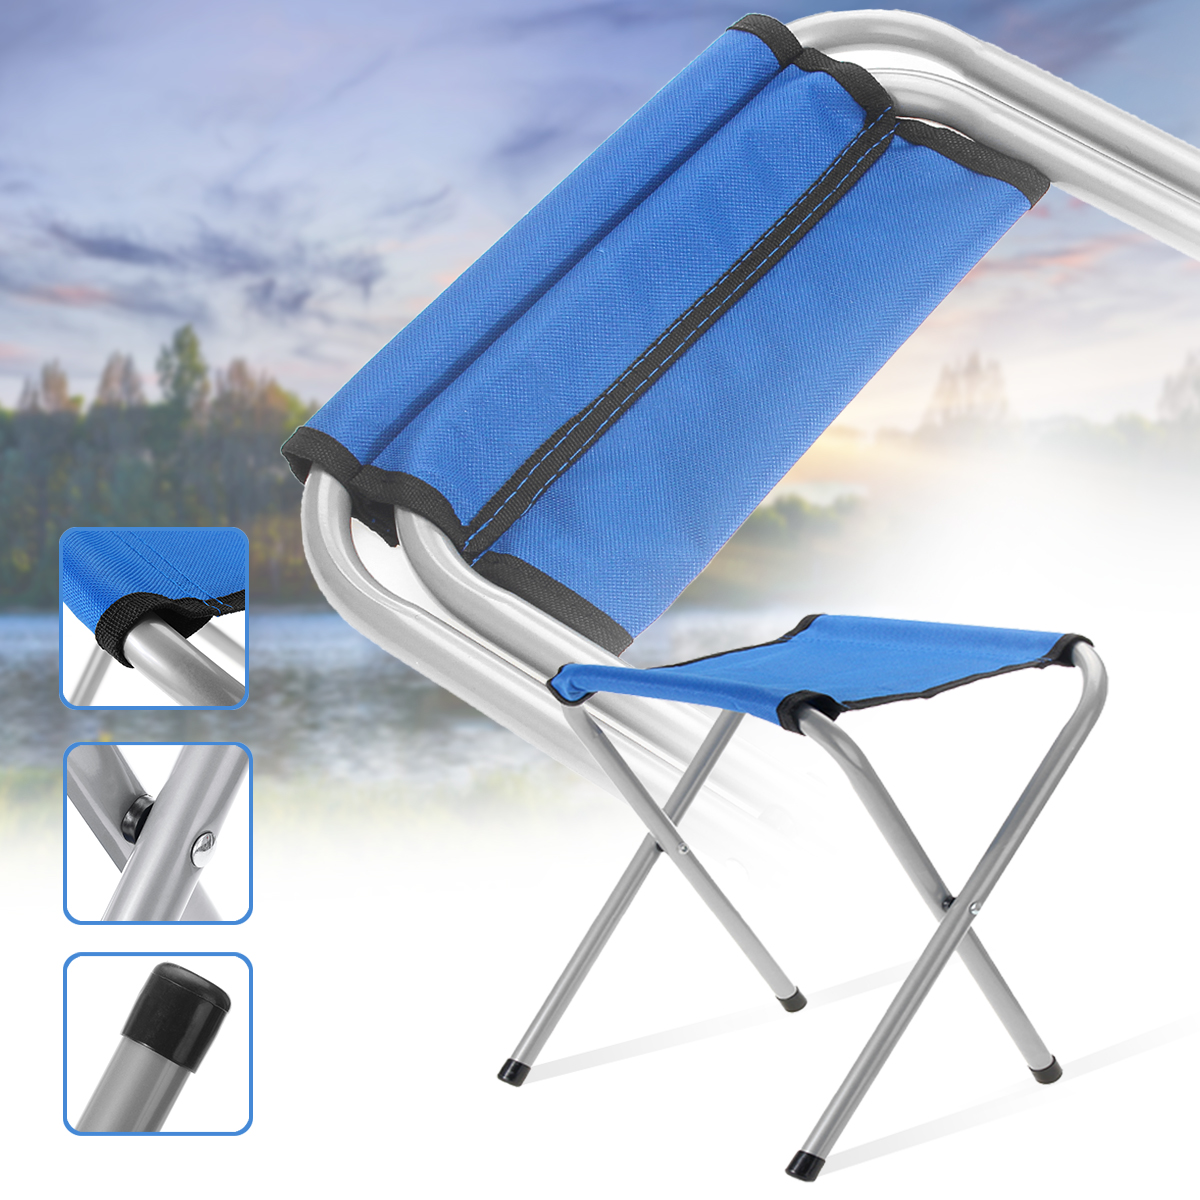 Collapsible Camp Stool,Perfect for Painting Fishing Camp Traveling Hiking Beach Garden BBQ Small Stool Camping Folding Chairs Outdoor Mini Stools Upone Mini Folding Stool Chair Portable